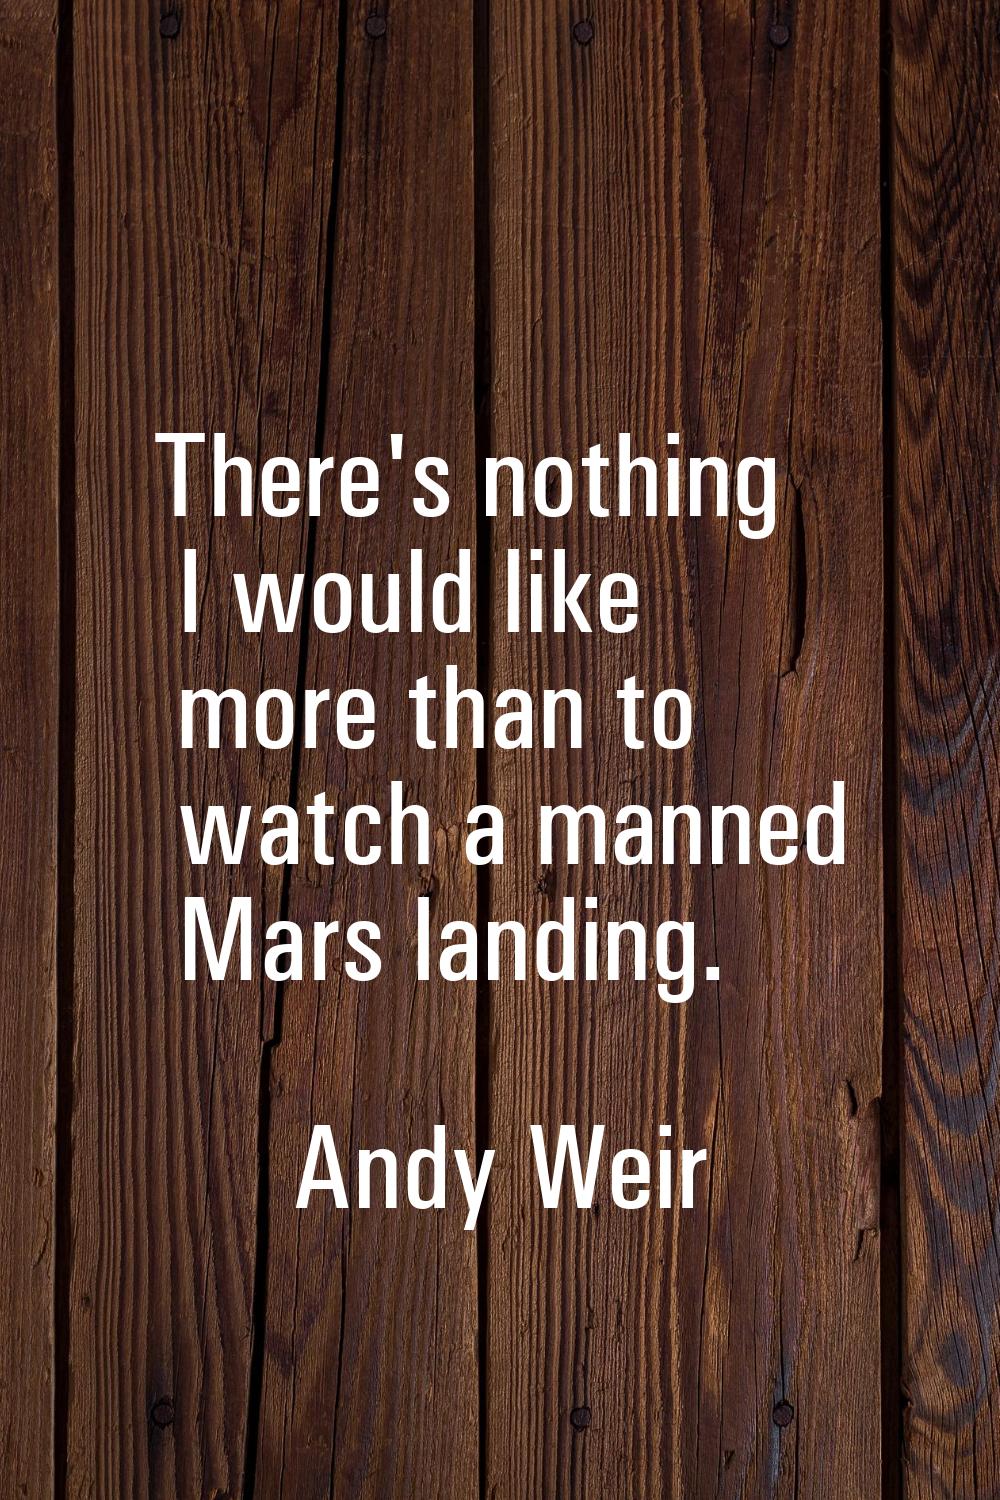 There's nothing I would like more than to watch a manned Mars landing.